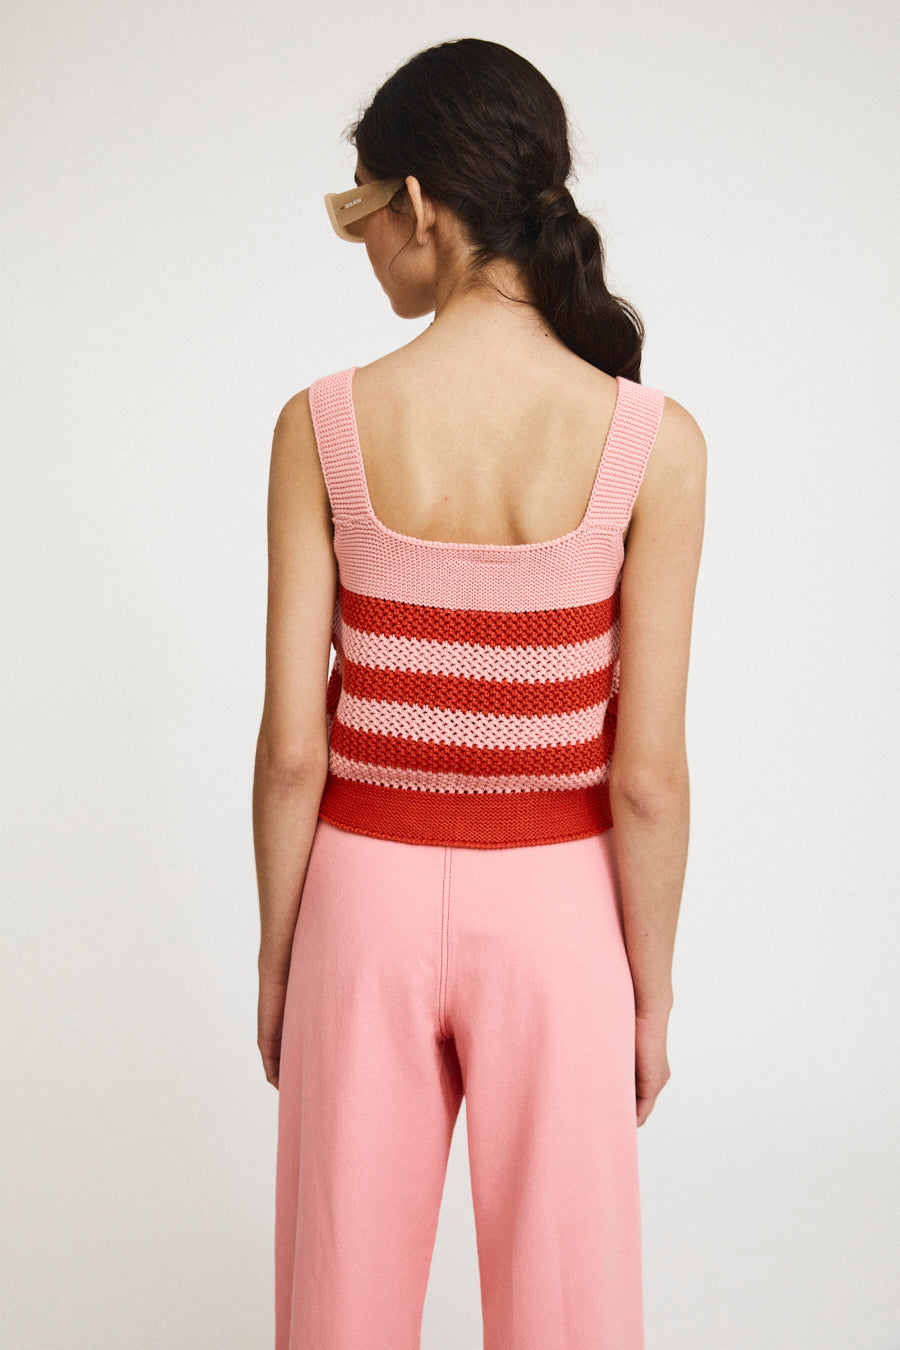 Layla top knit with stripes red/pink